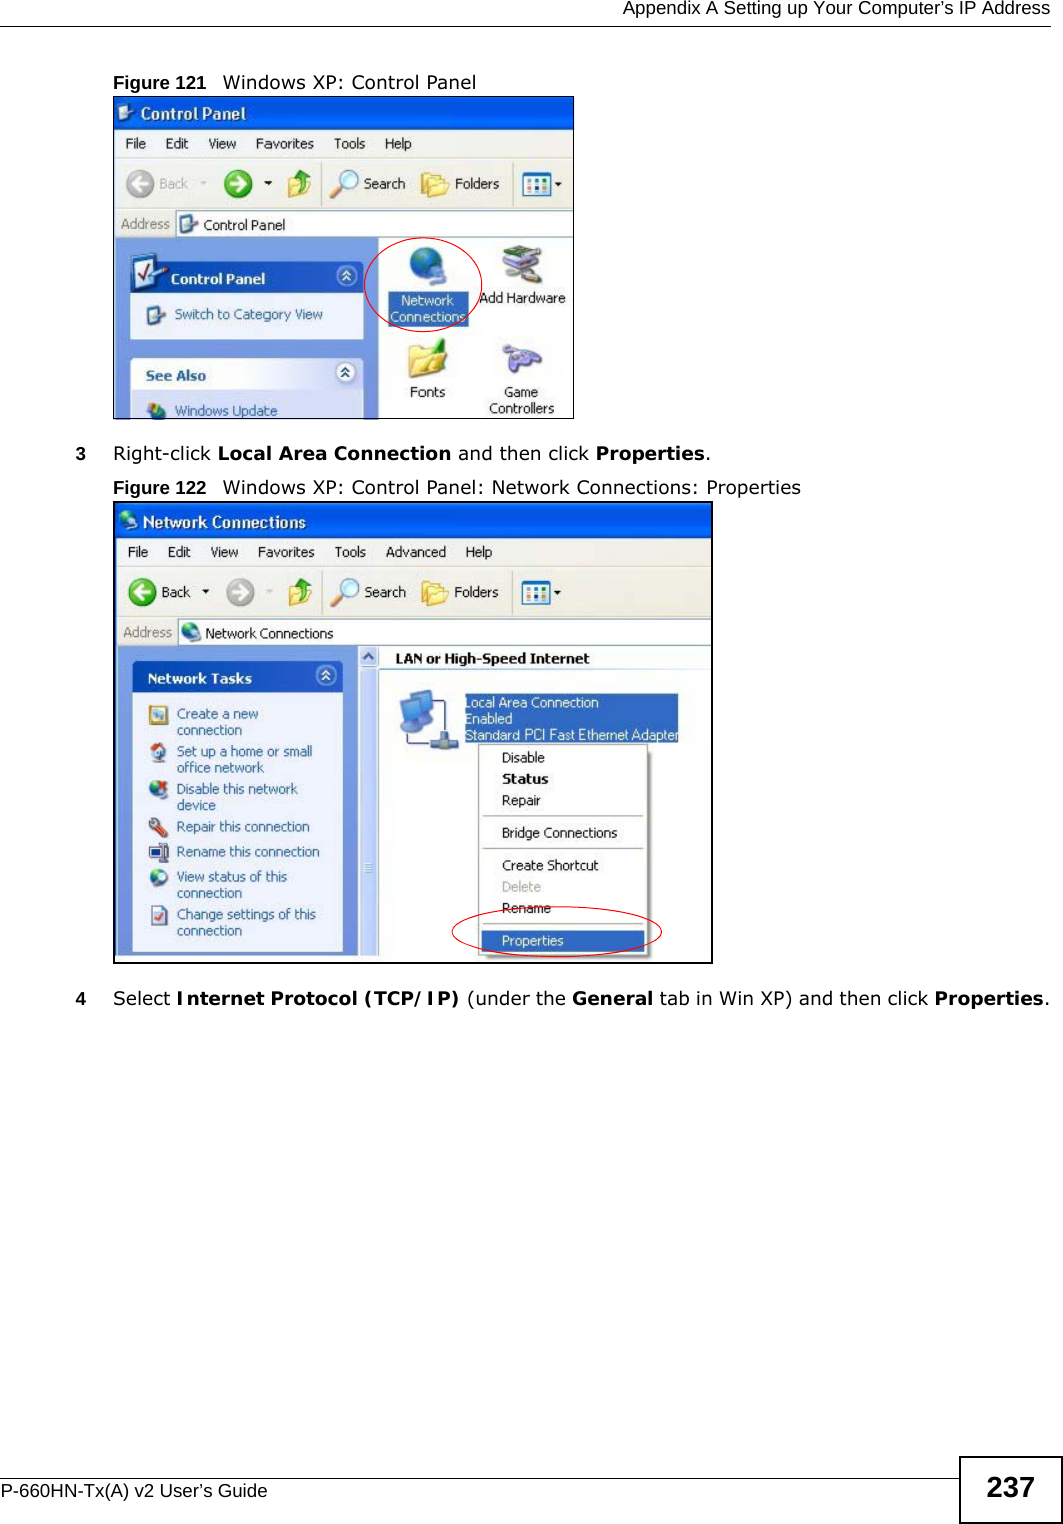  Appendix A Setting up Your Computer’s IP AddressP-660HN-Tx(A) v2 User’s Guide 237Figure 121   Windows XP: Control Panel3Right-click Local Area Connection and then click Properties.Figure 122   Windows XP: Control Panel: Network Connections: Properties4Select Internet Protocol (TCP/IP) (under the General tab in Win XP) and then click Properties.